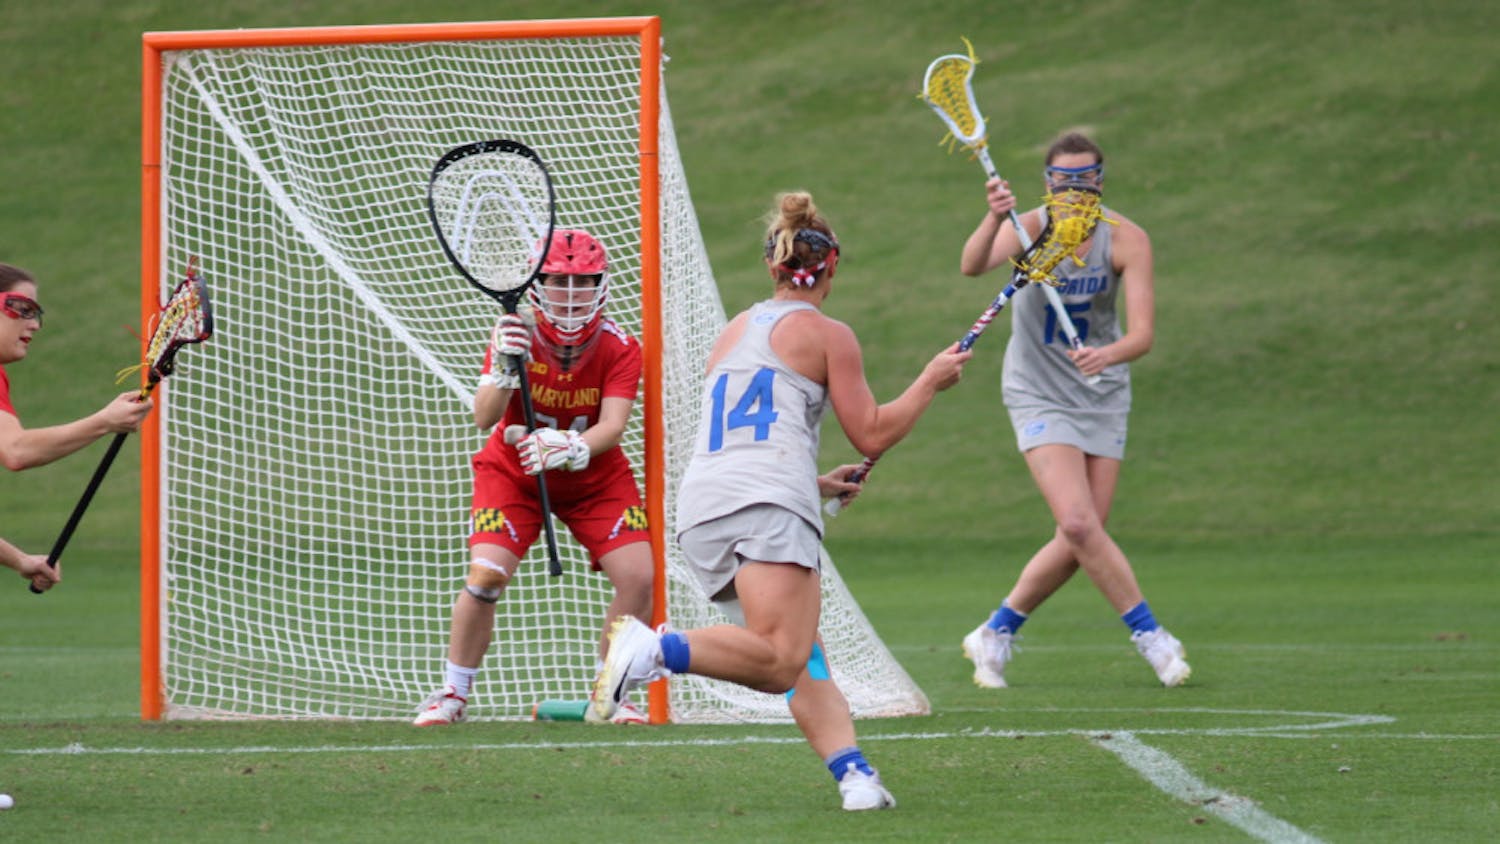 Lindsey Ronbeck scored five goals and one assist in the Florida lacrosse team's 32-1 win over Scotland on Saturday.
&nbsp;